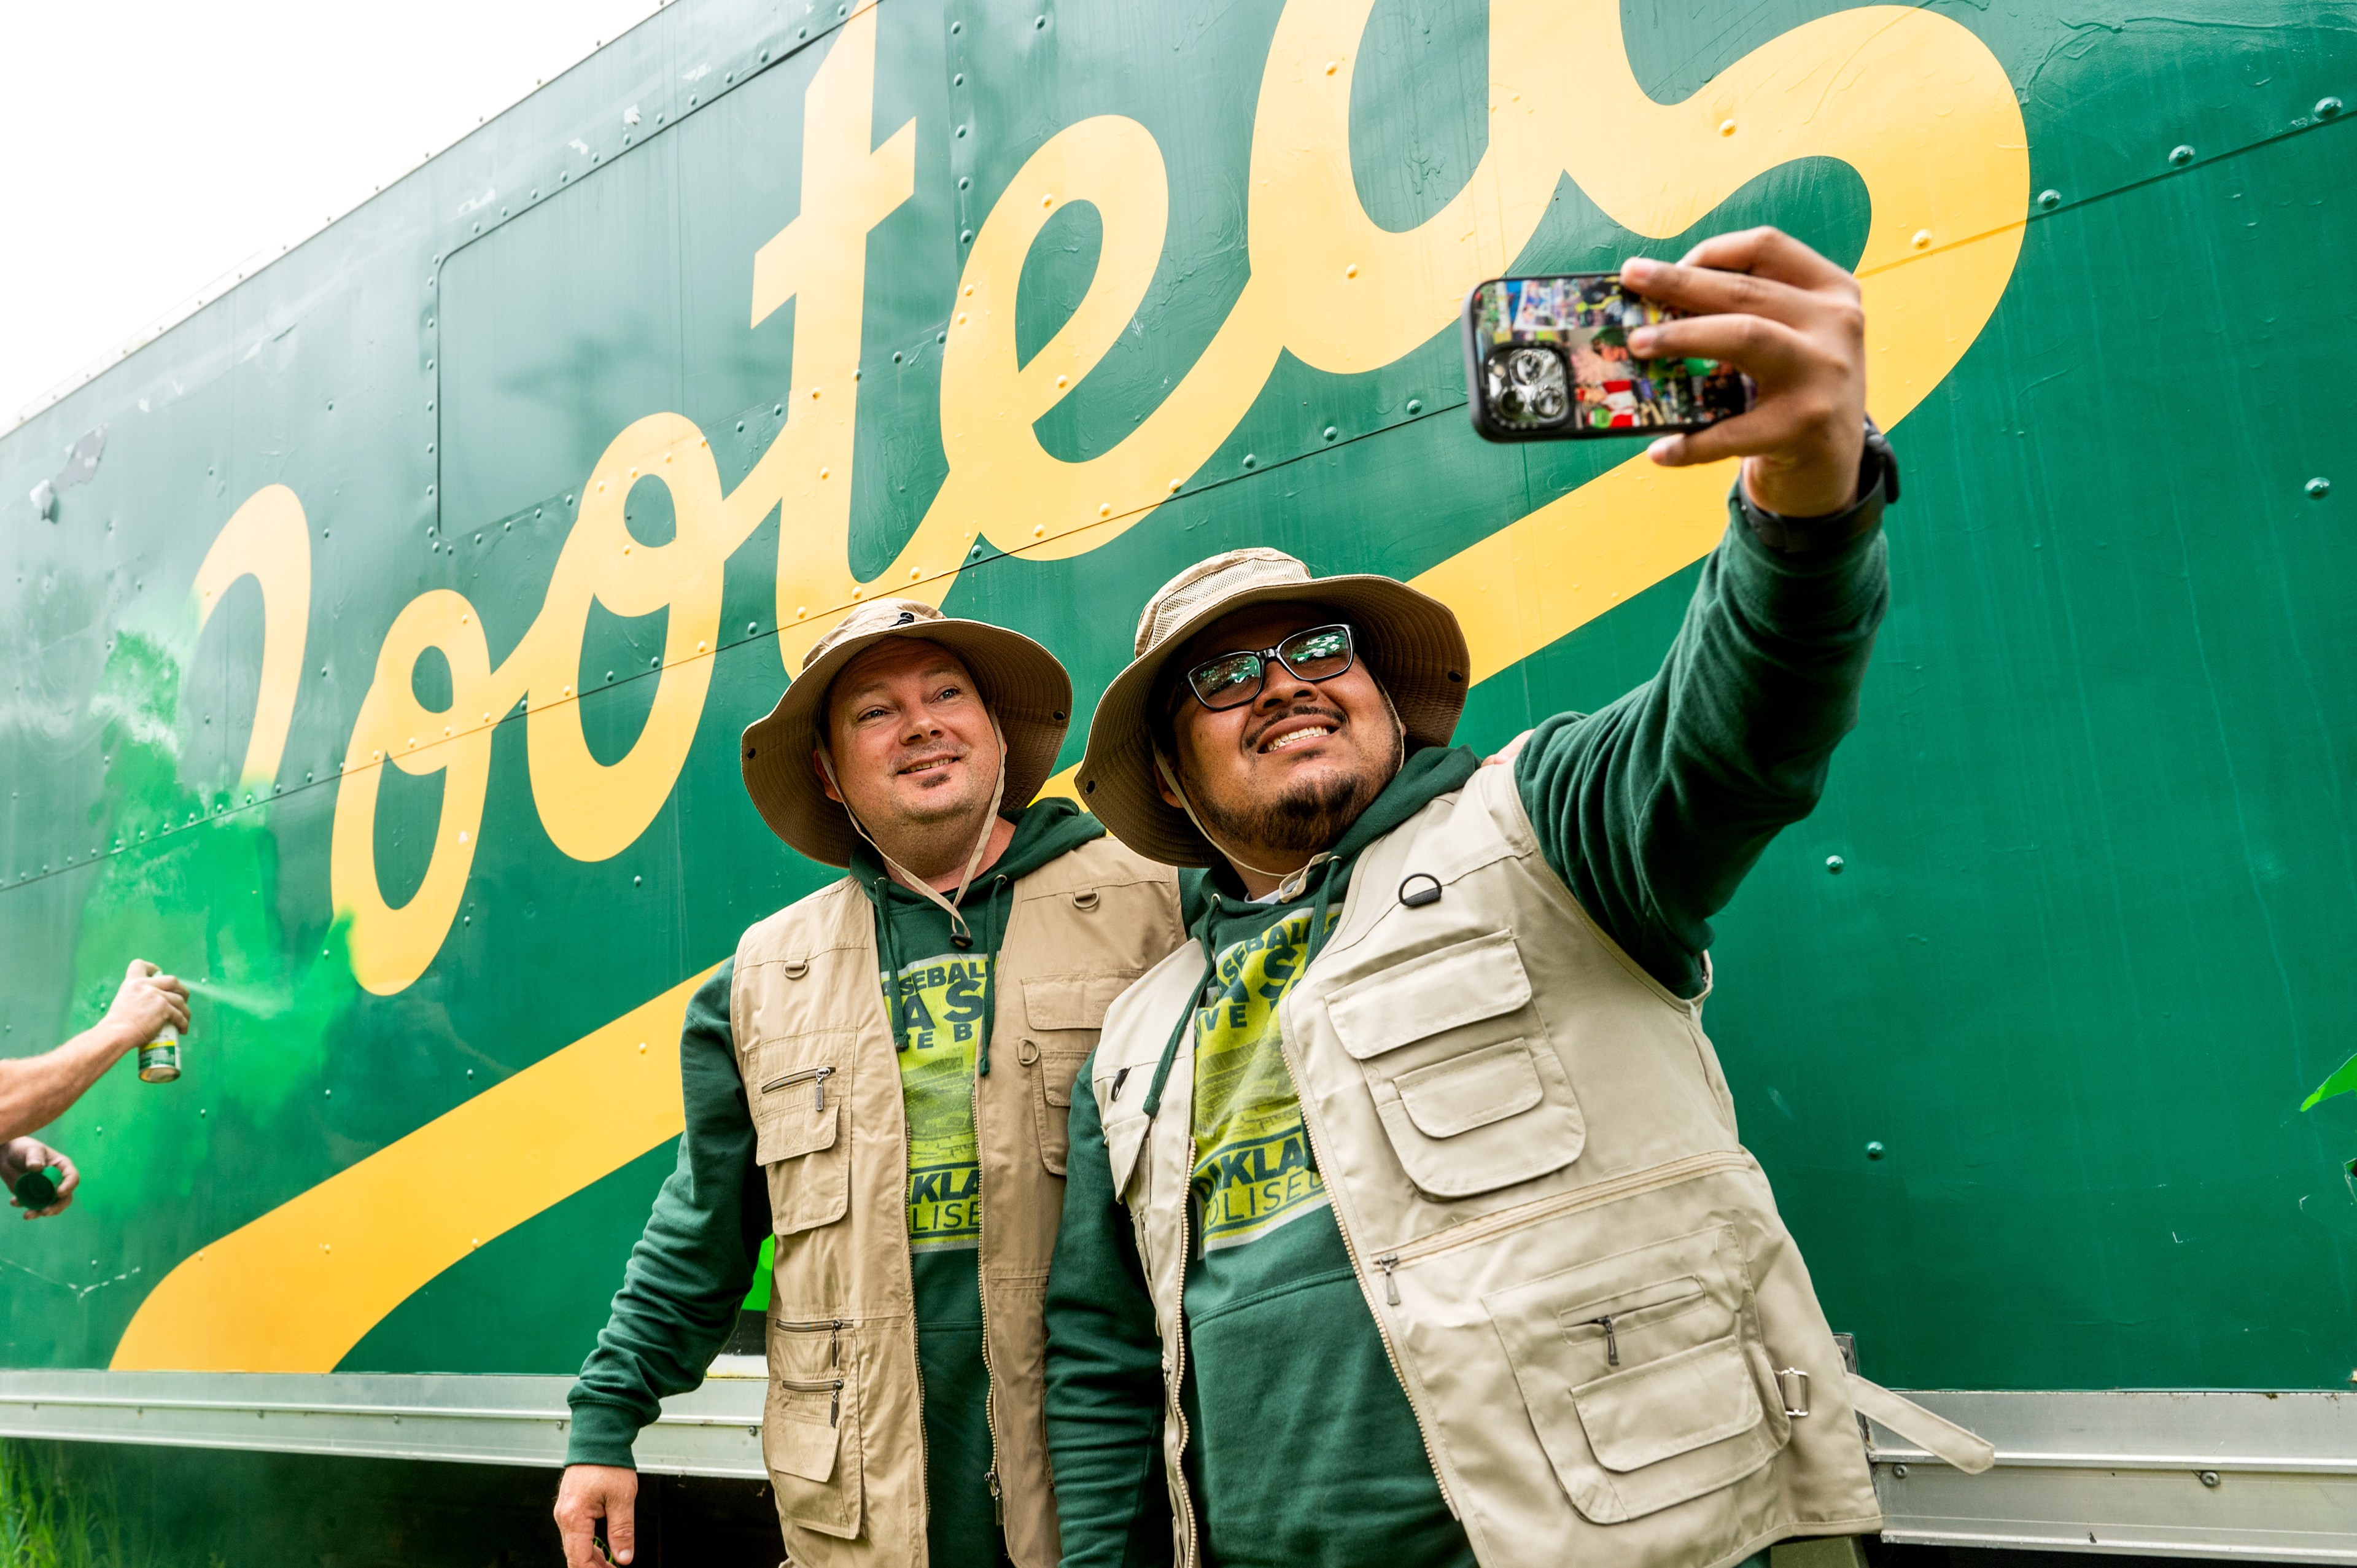 Two men in hats and vests take a selfie in front of a green truck with yellow text.